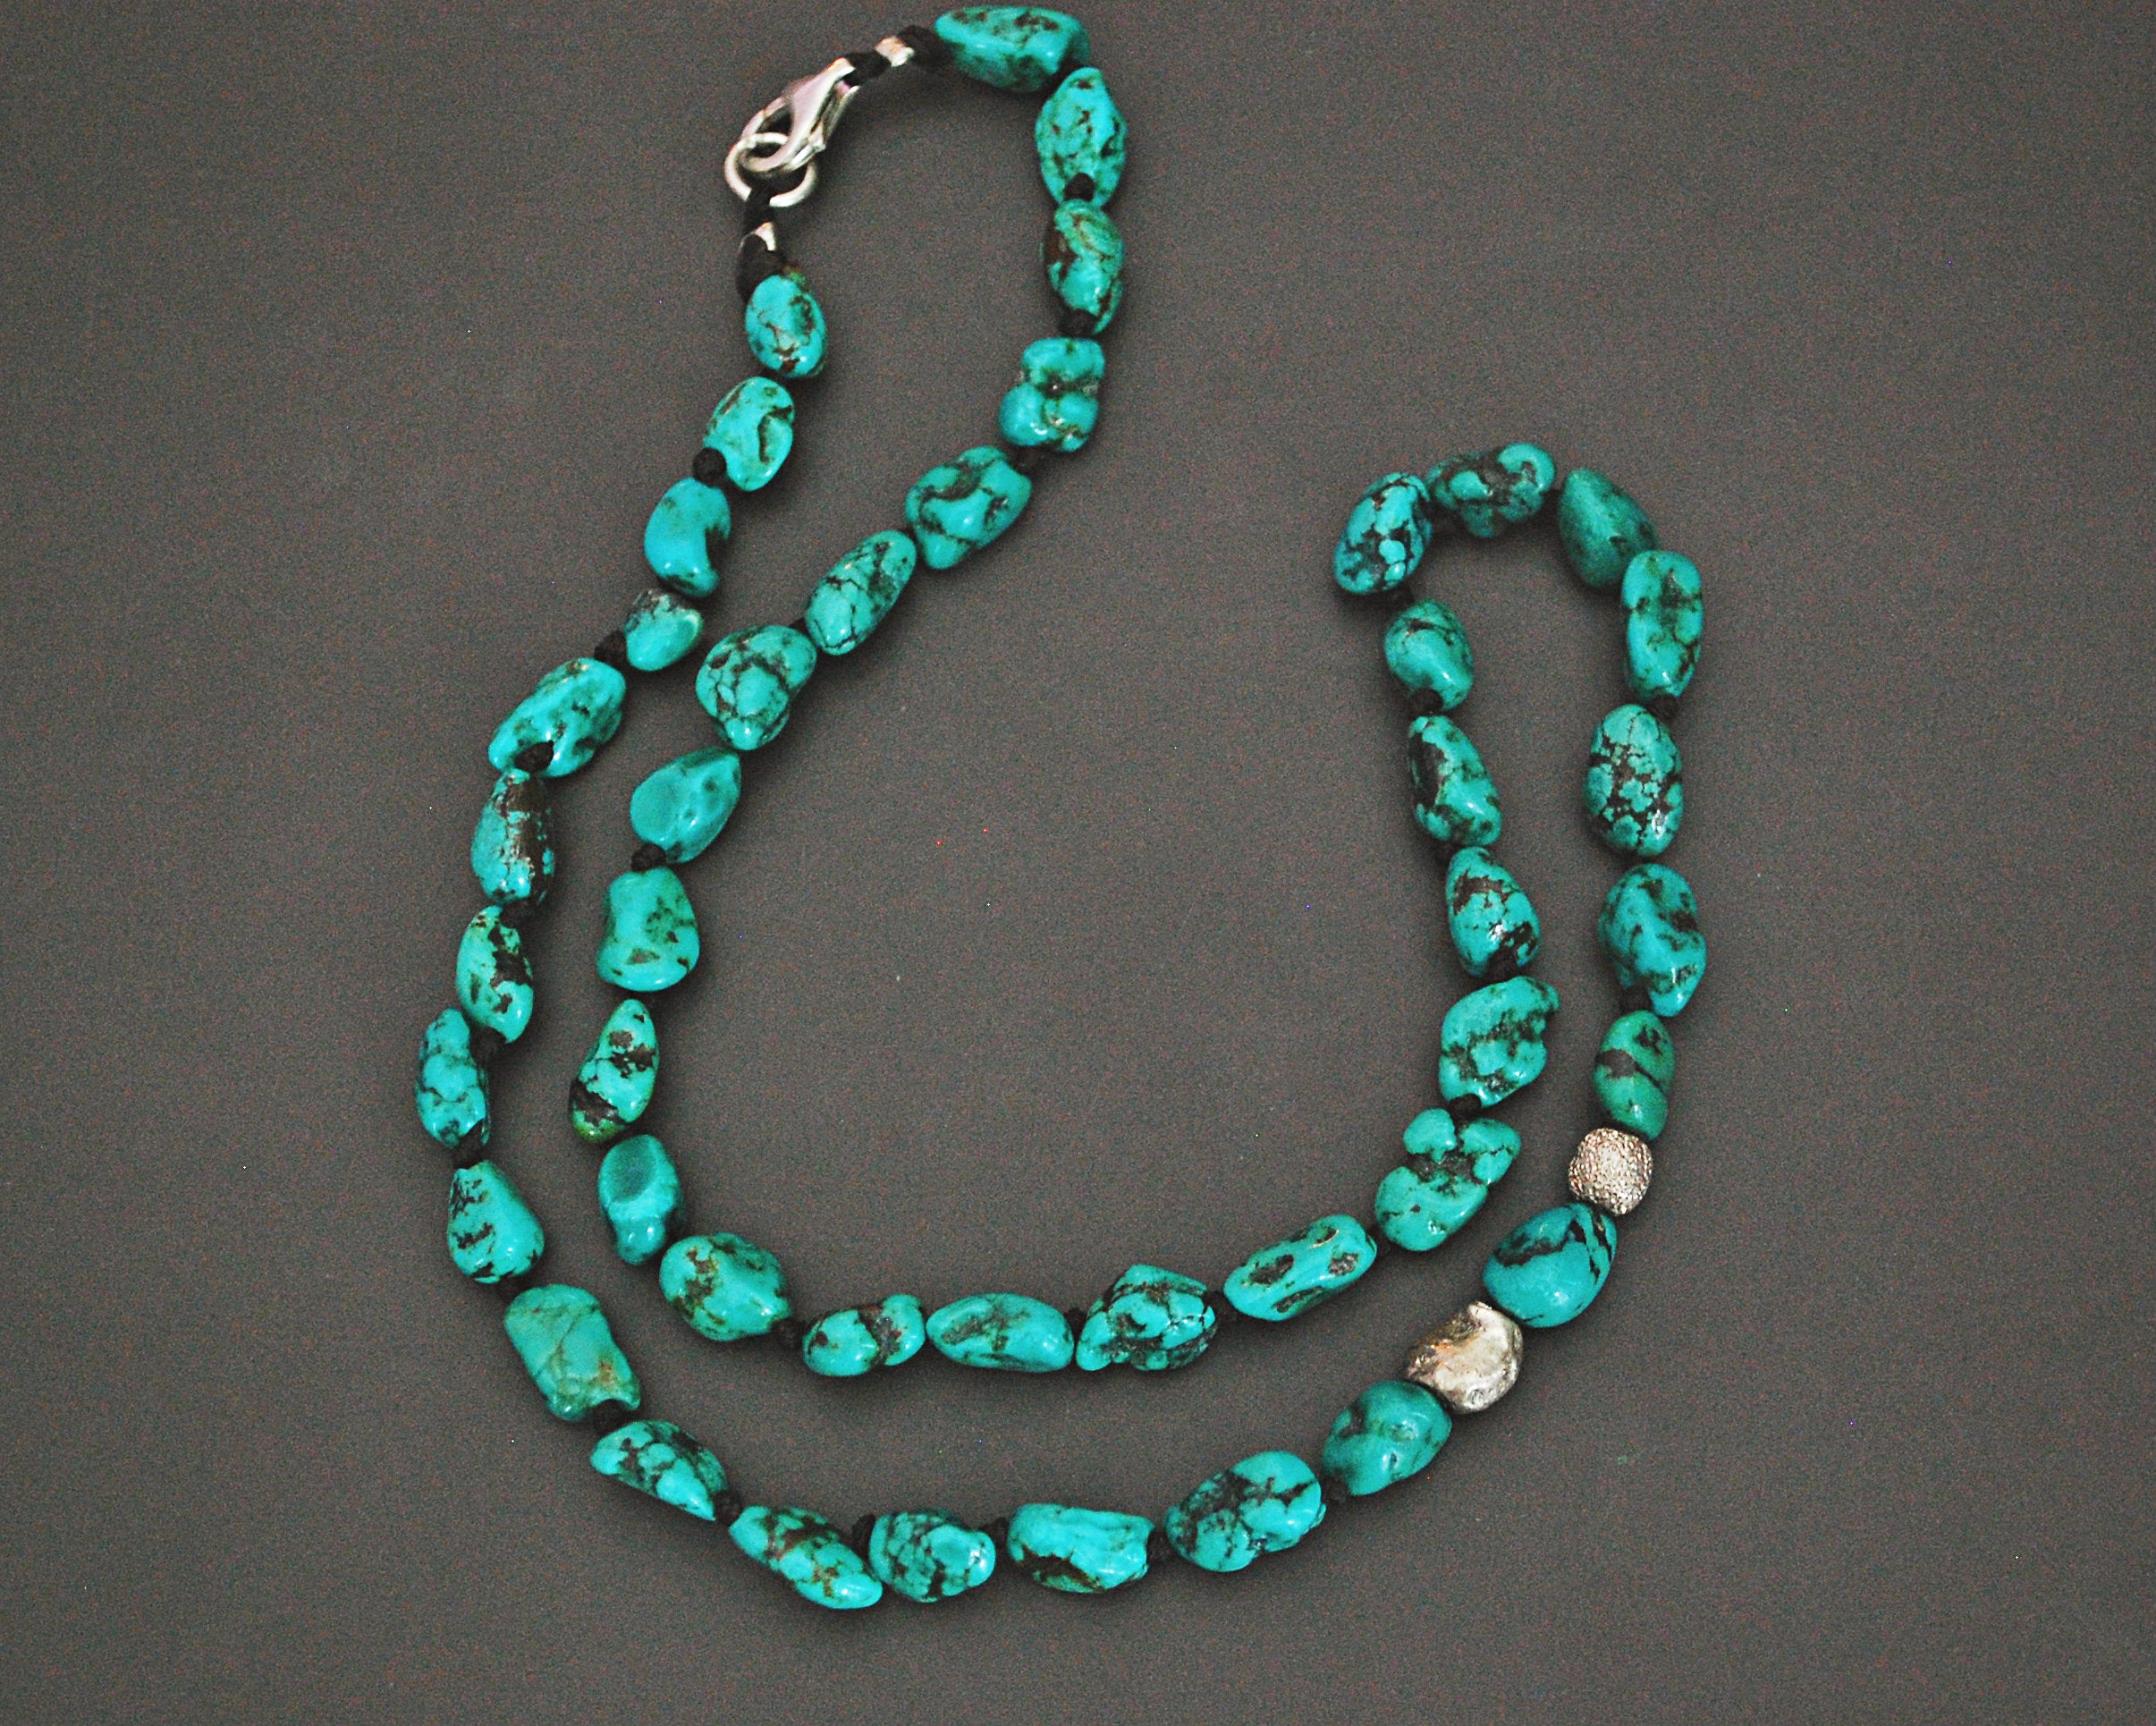 Knotted Turquoise Nugget Necklace with Silver Beads